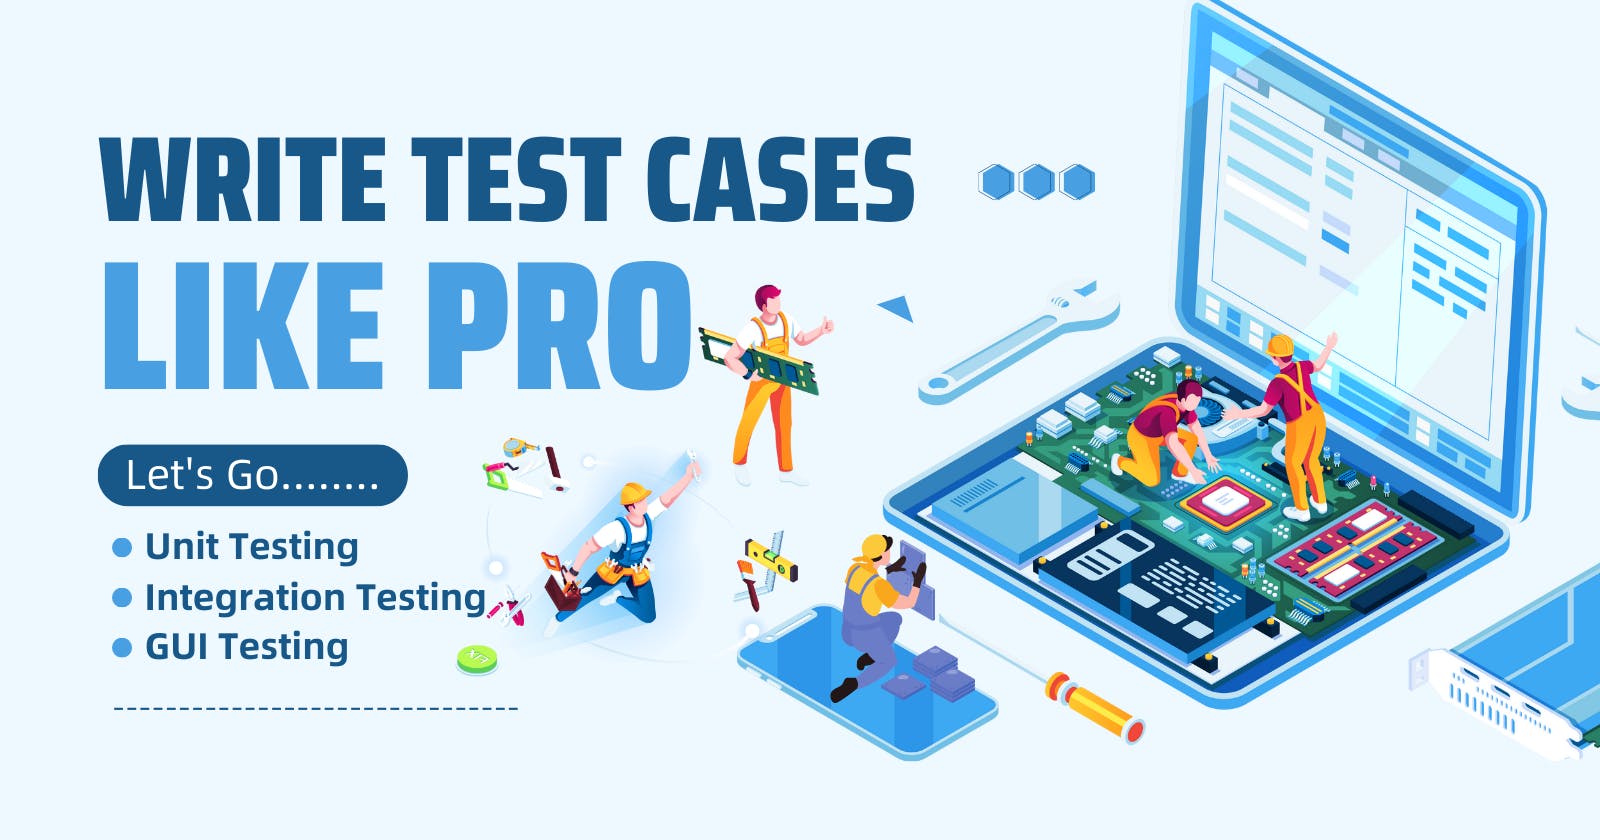 Master the Art of Writing Effective Test Cases